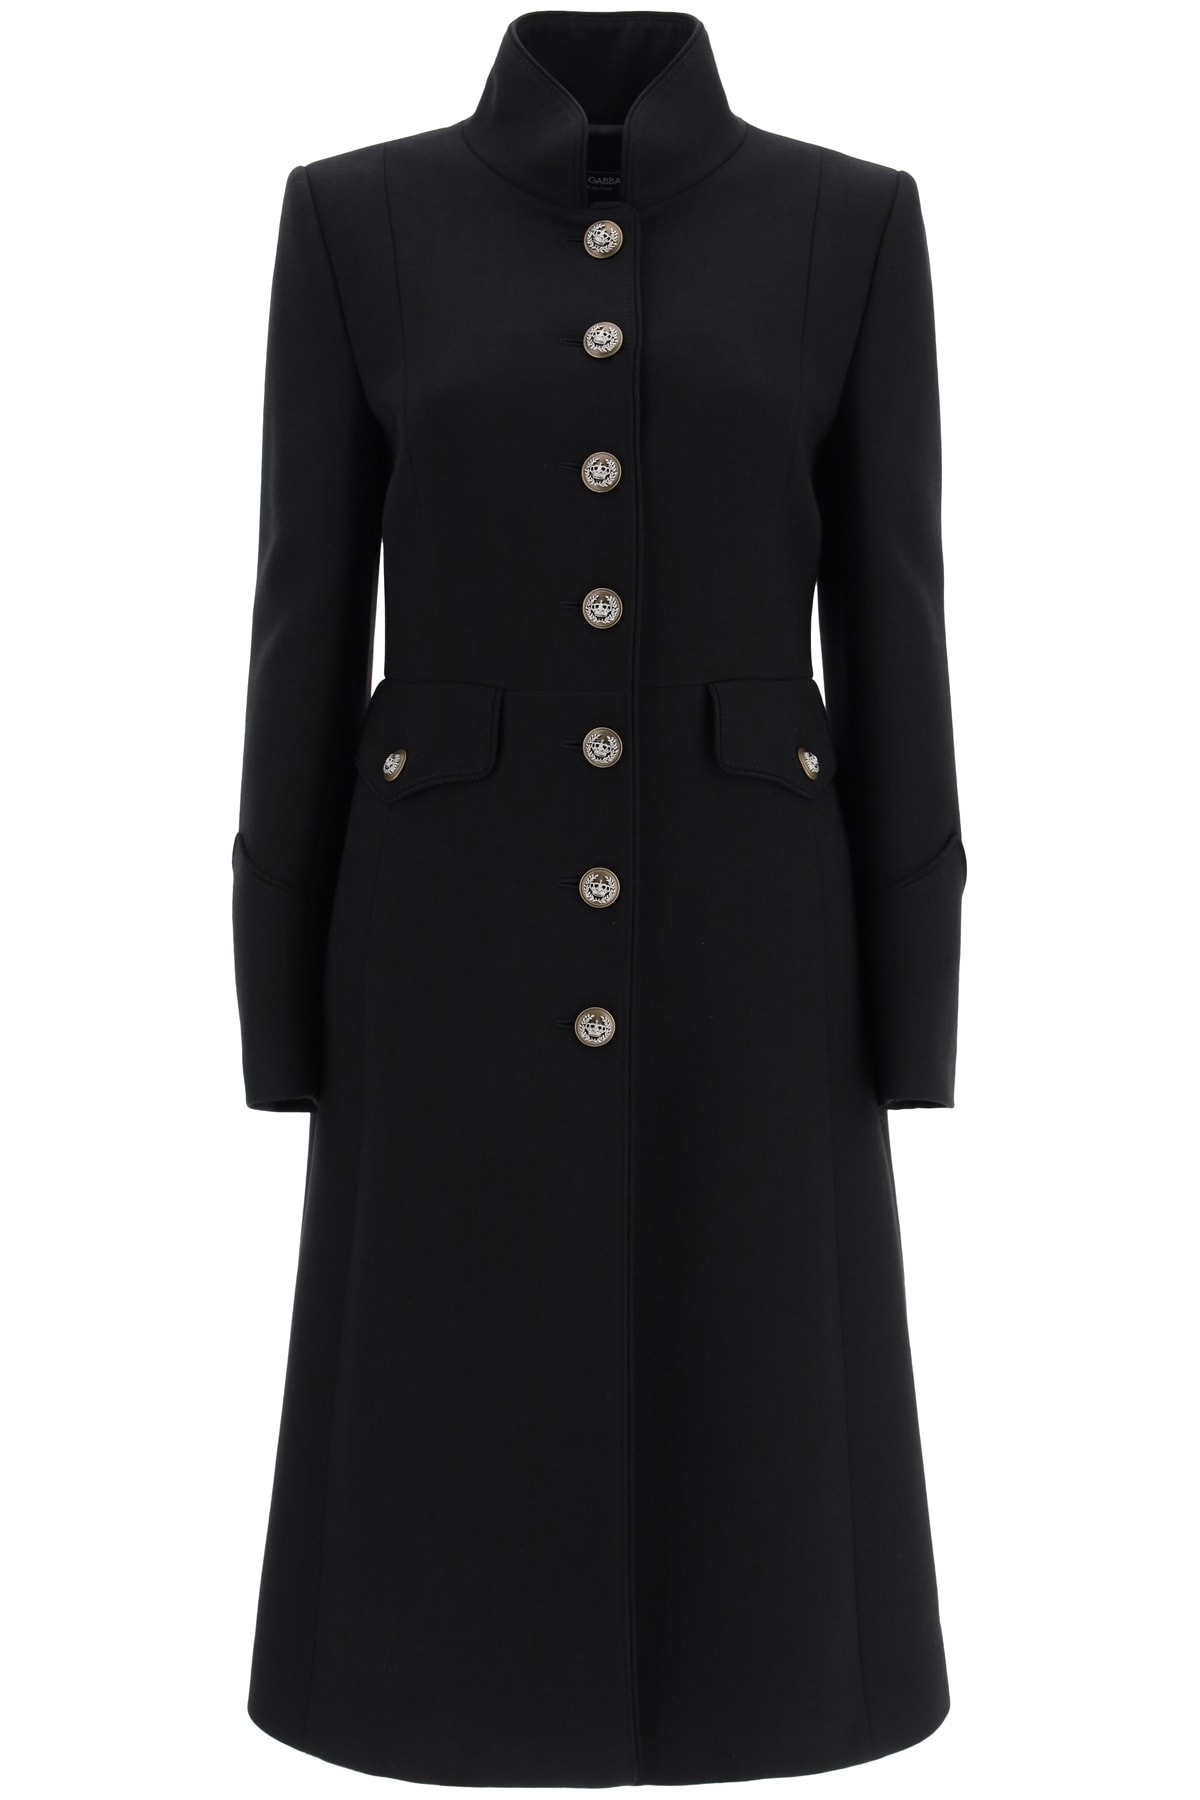 Dolce & Gabbana Wool Coat With Heraldic Buttons